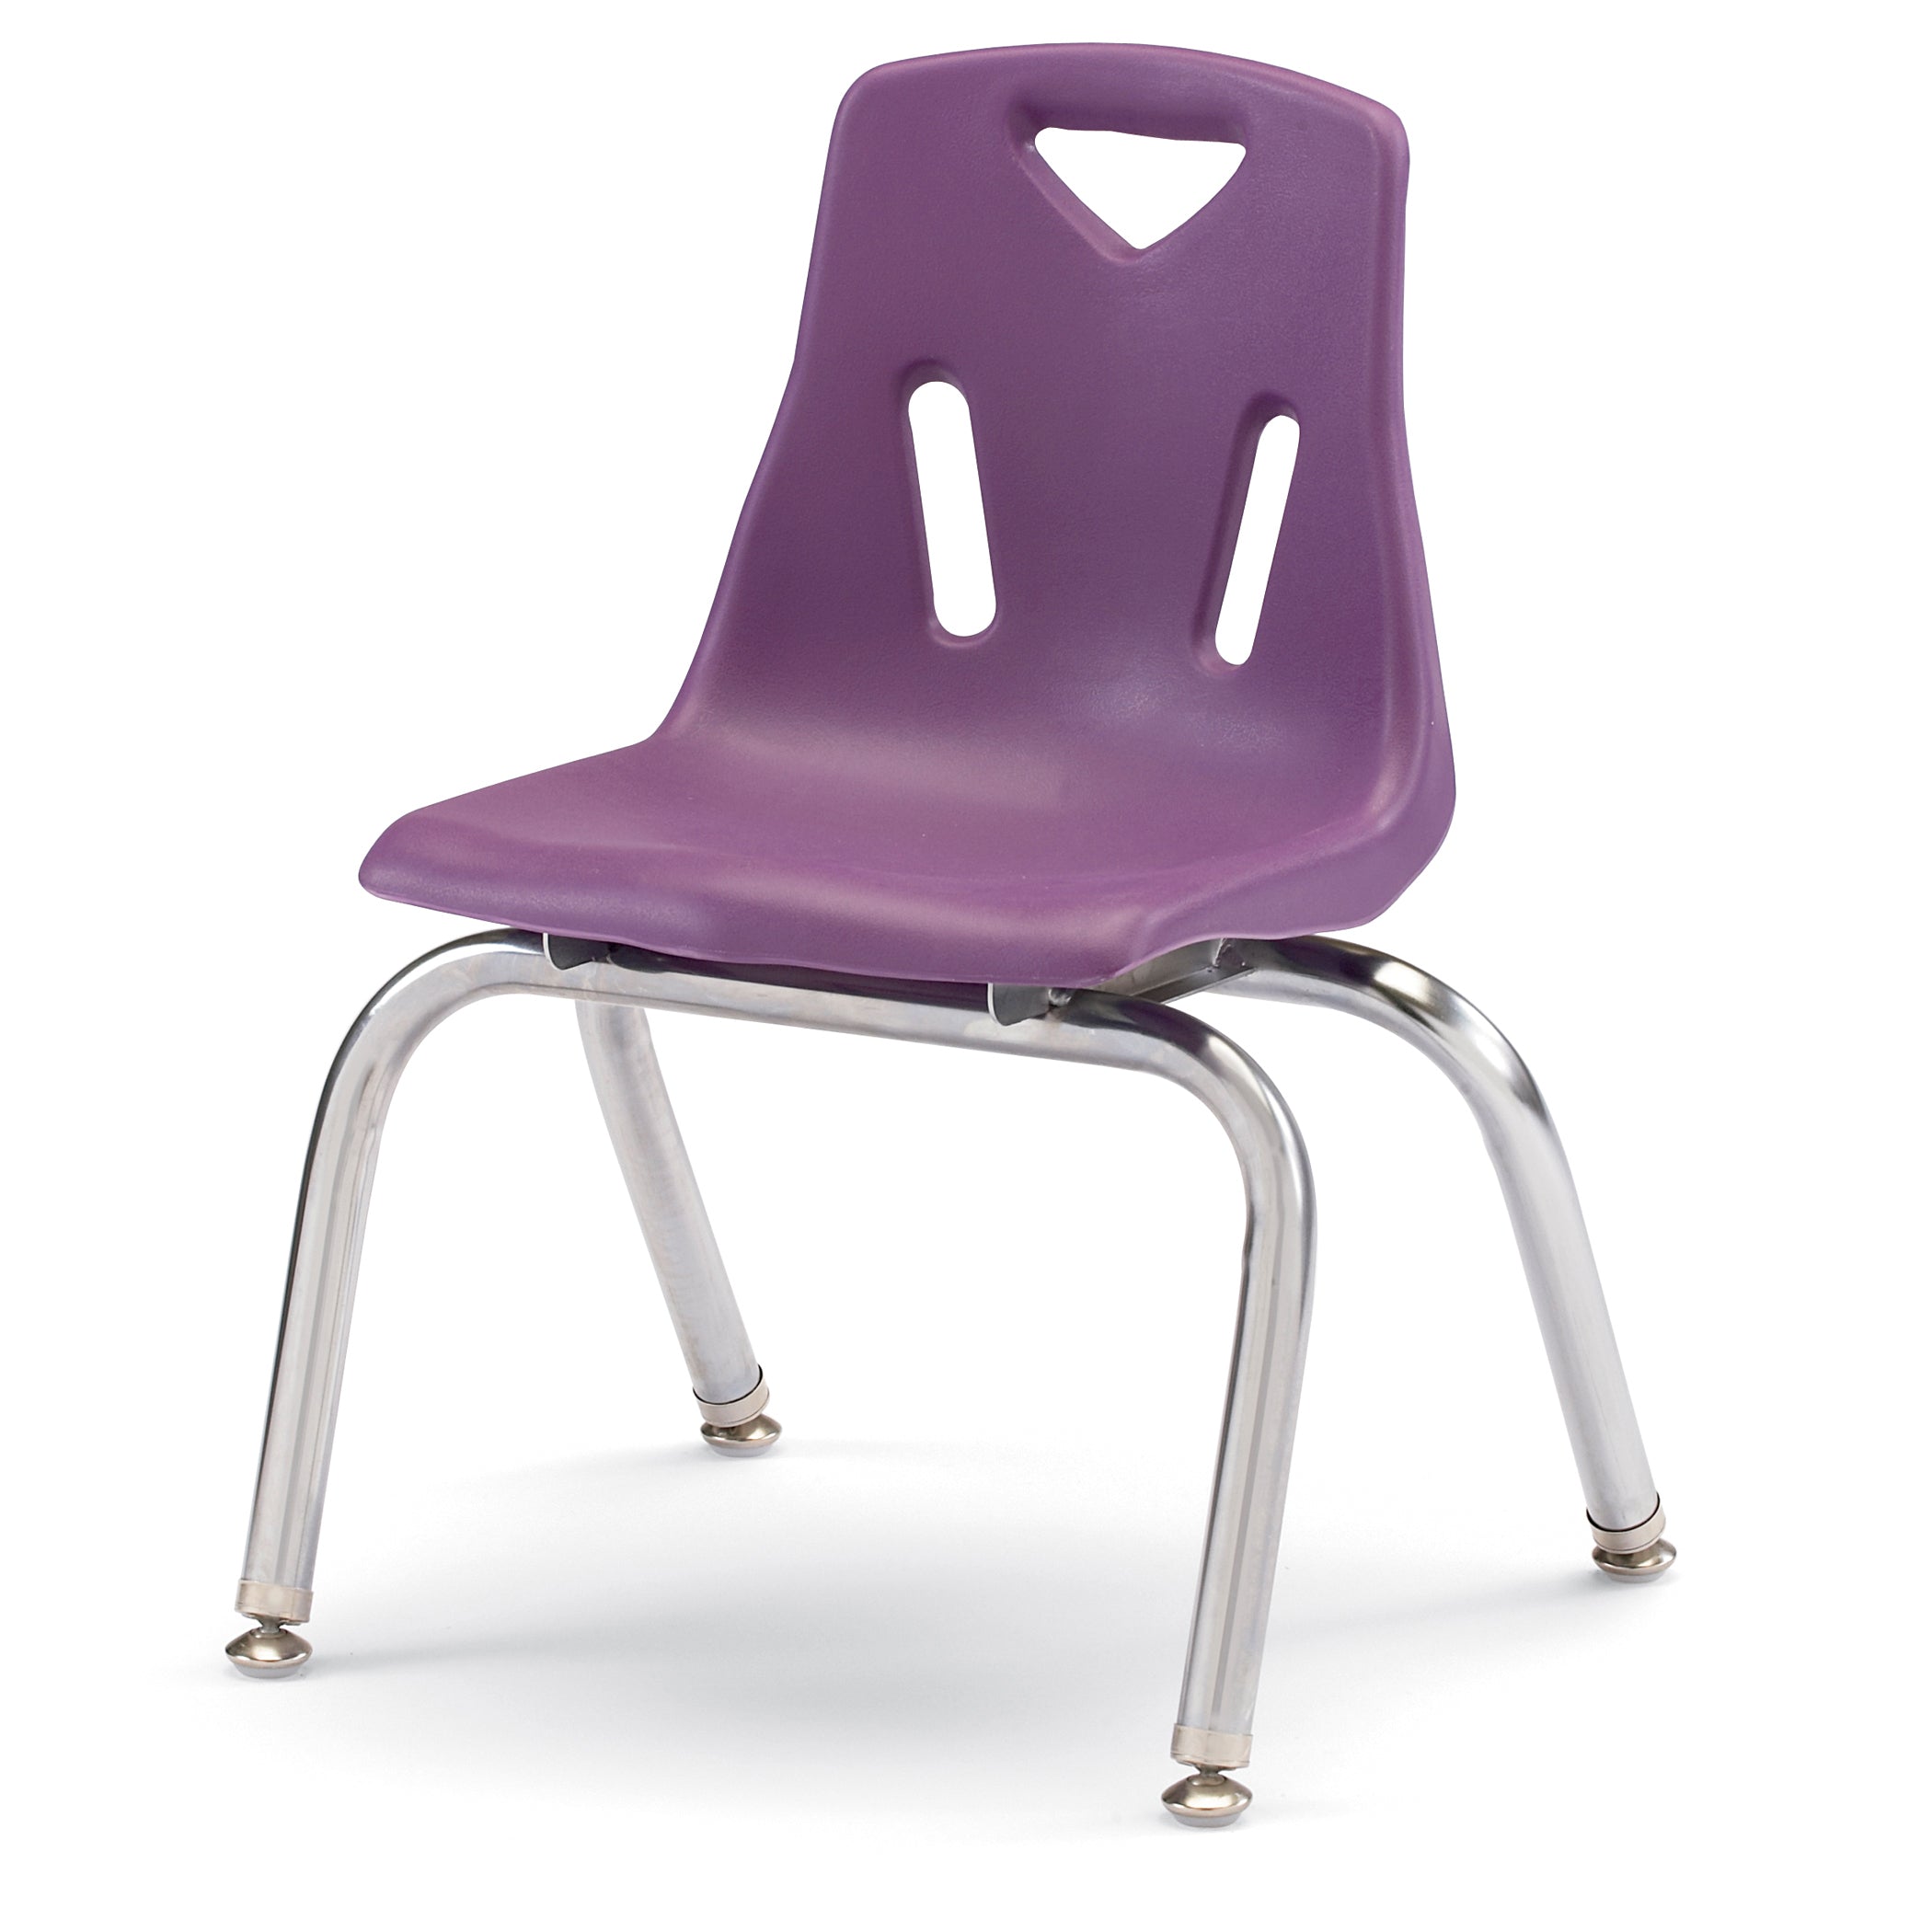 8142JC6004, Berries Stacking Chairs with Chrome-Plated Legs - 12" Ht - Set of 6 - Purple